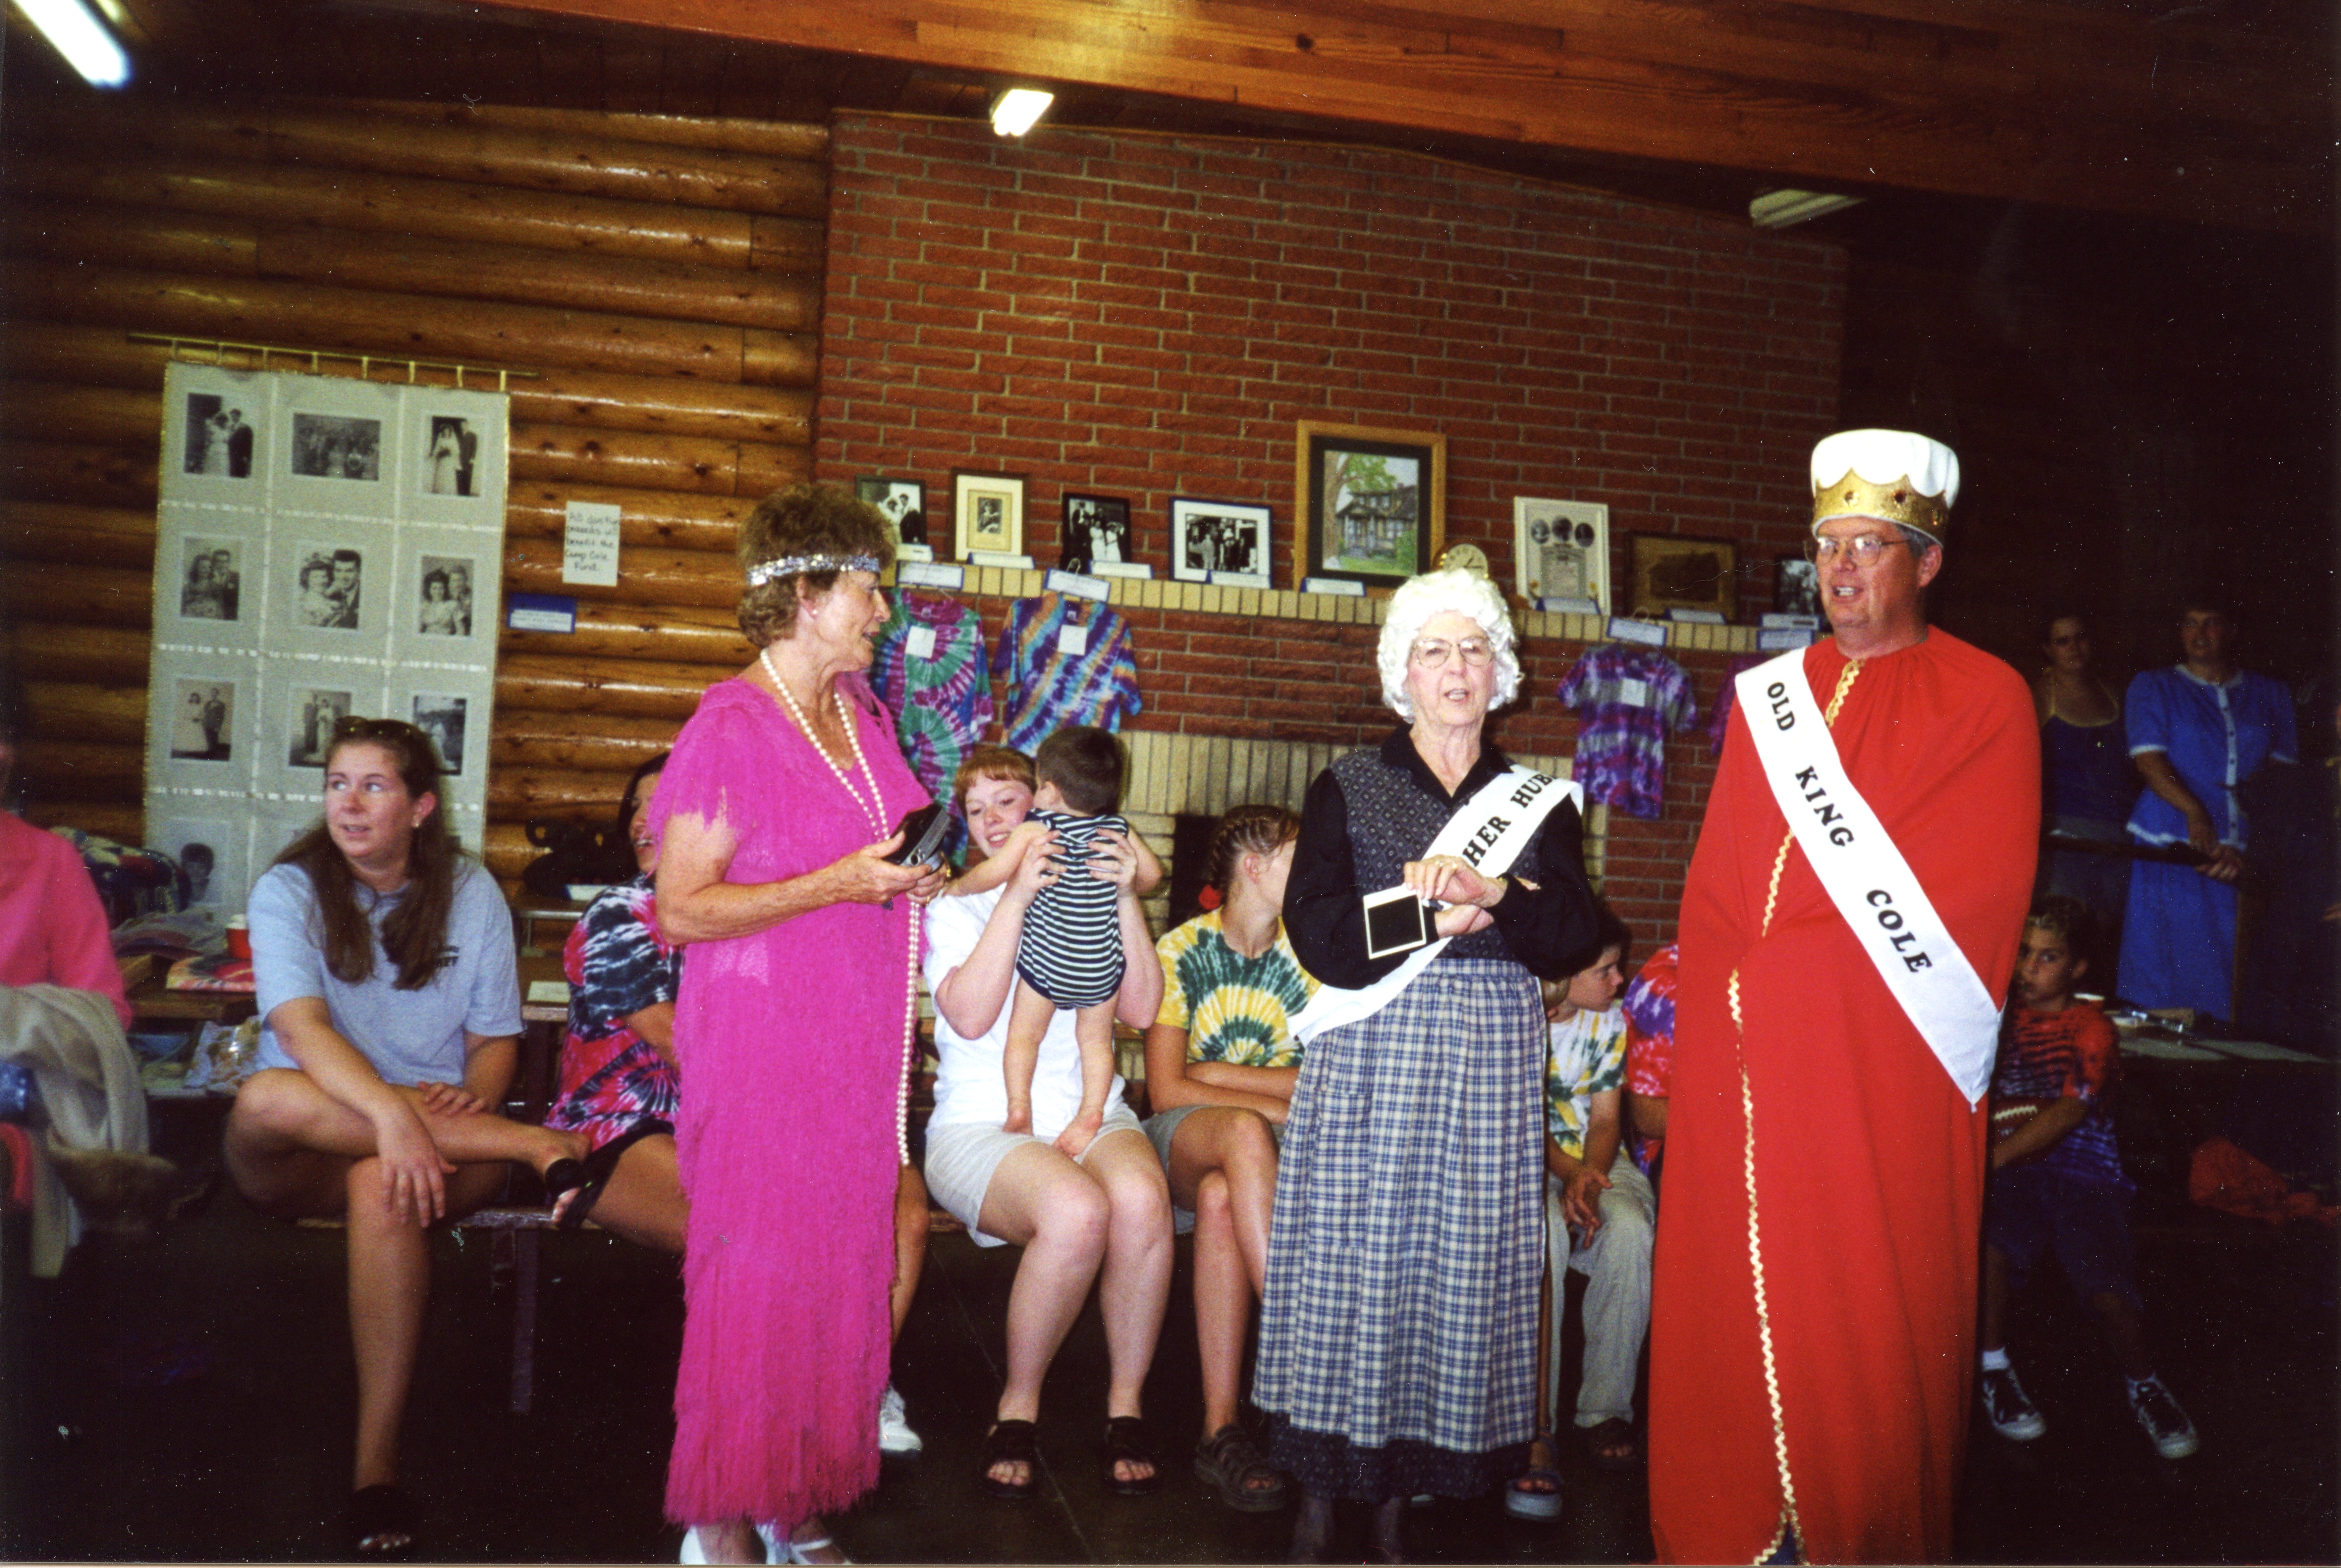 Anne LaCroix visits with Thelma and John McLain, costume contest winners, in front of the auction items during the 2000 reunion in the Bear Paw Mountains near Havre, Montana.